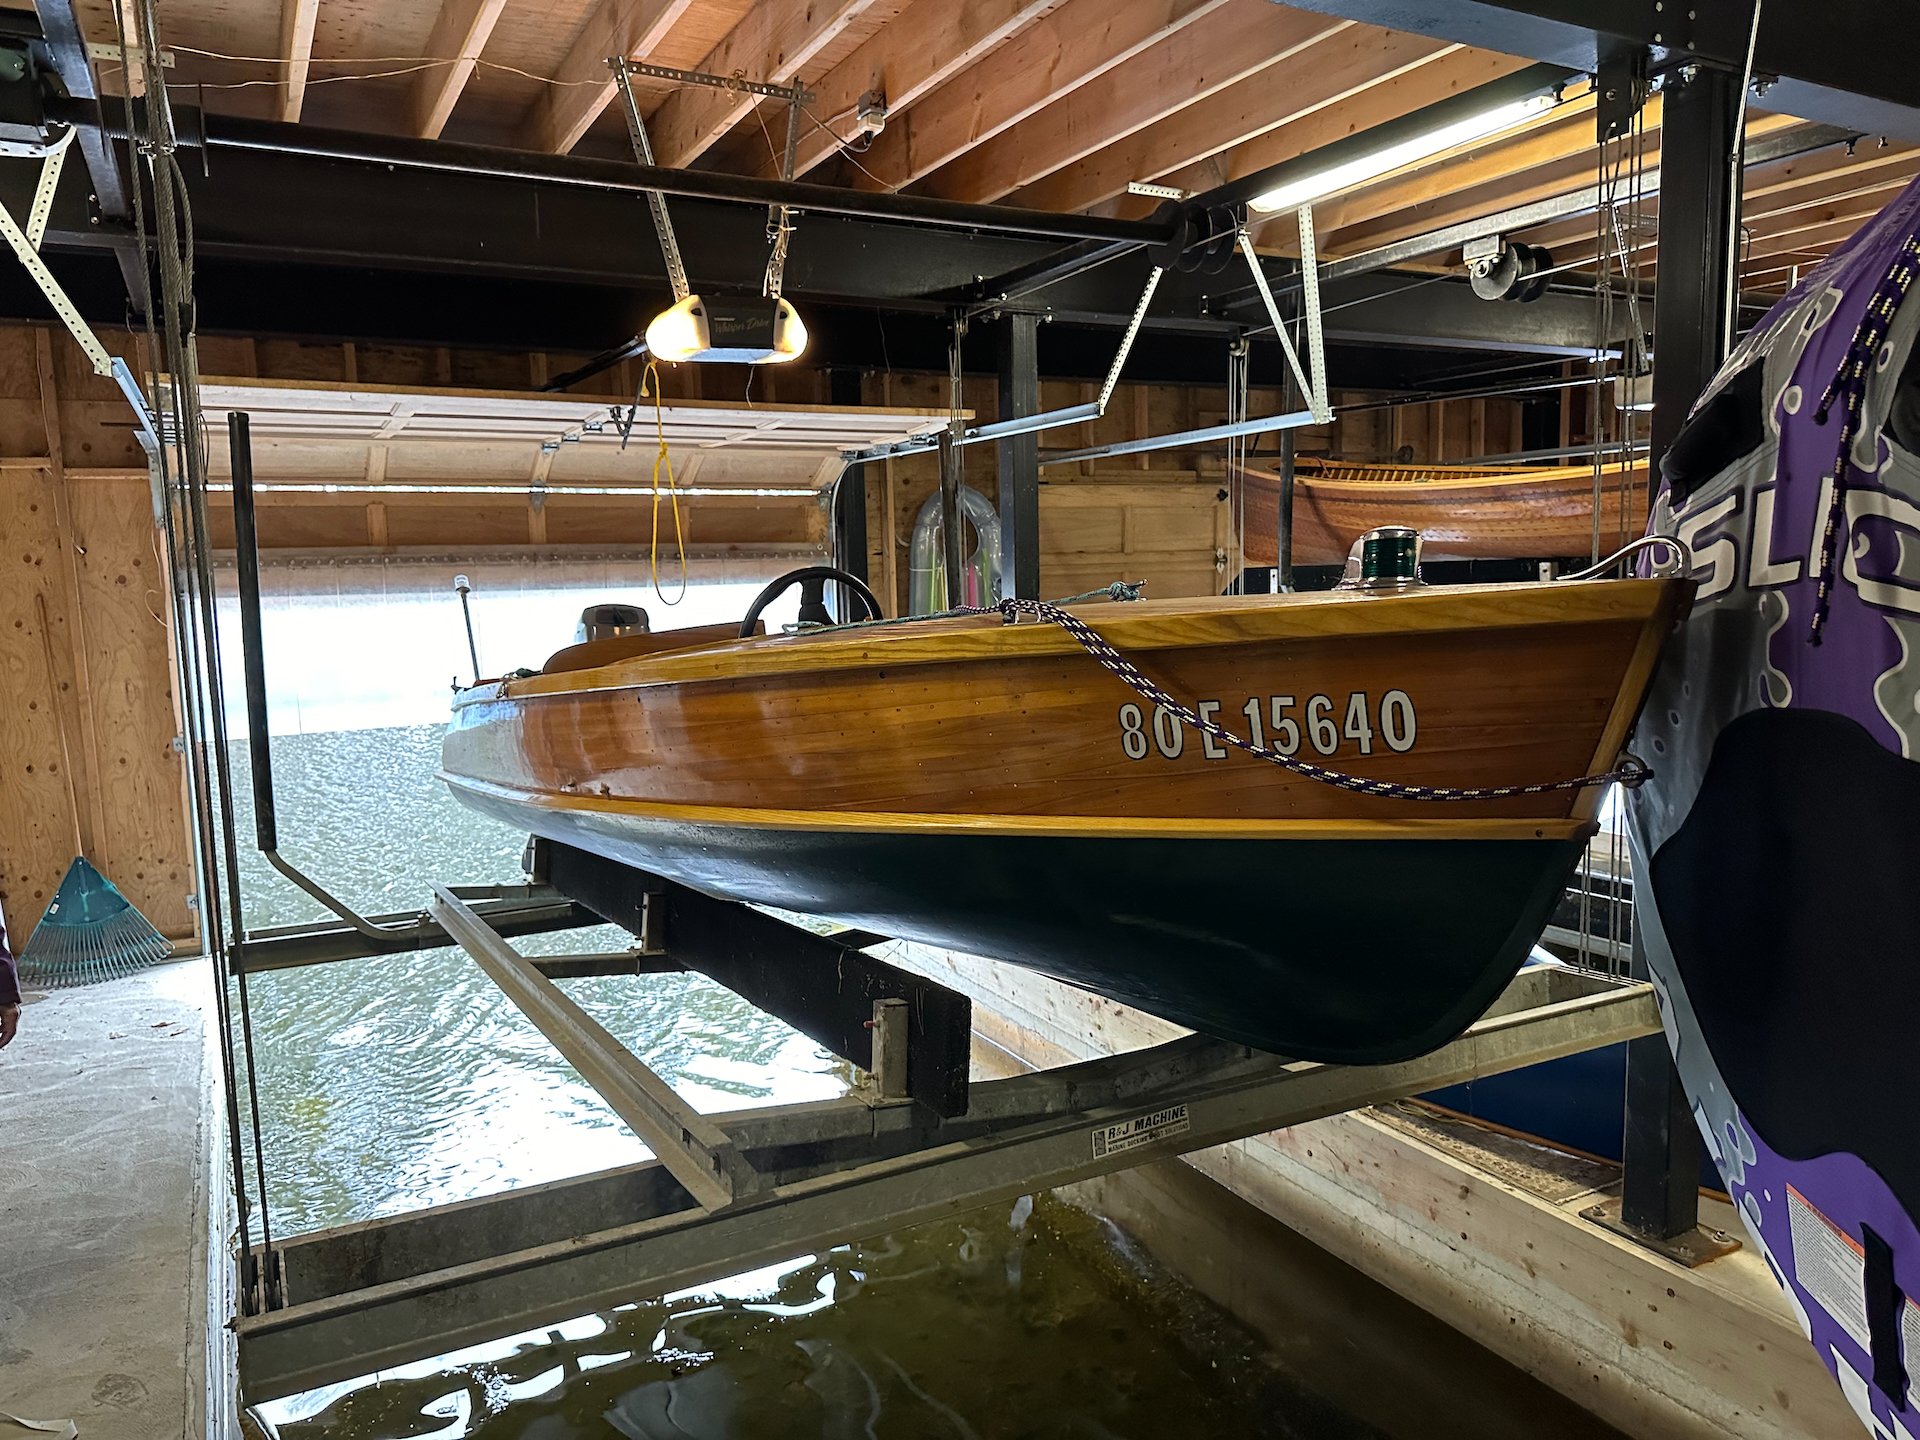  Their wooden runabout is just beautiful. Handmade, it’s just perfect for the lake.  